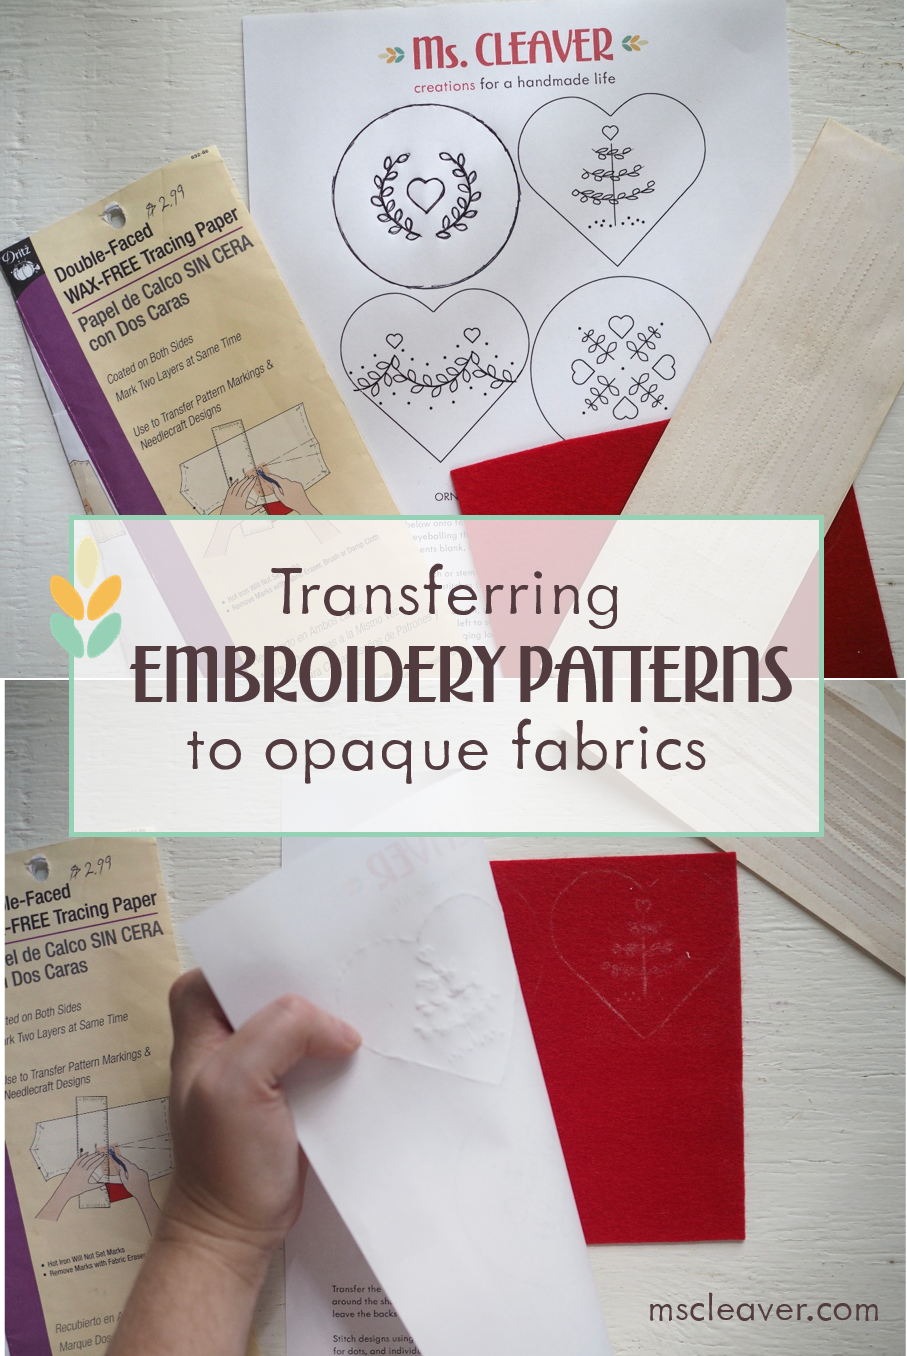 How Embroidery Comes To Life With Water-Soluble Fabric